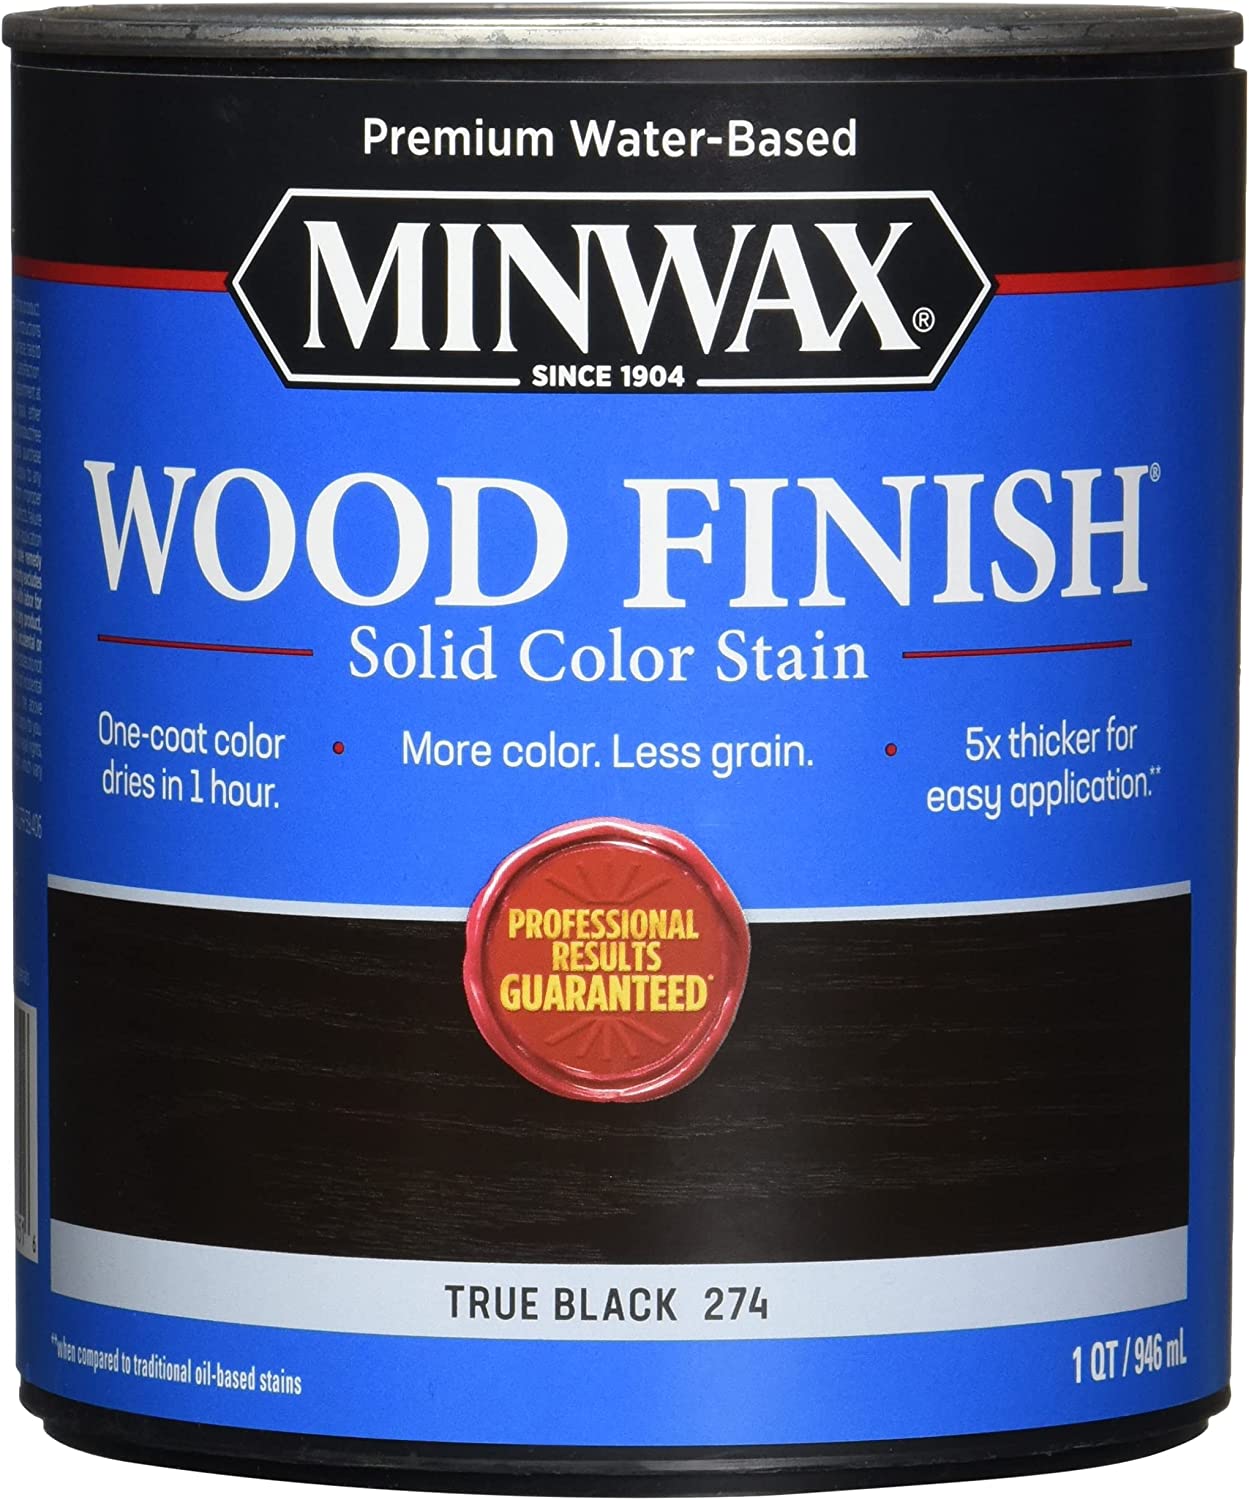 Minwax® Wood Finish® Water-Based Solid Color Stain, True Black, 1 Quart